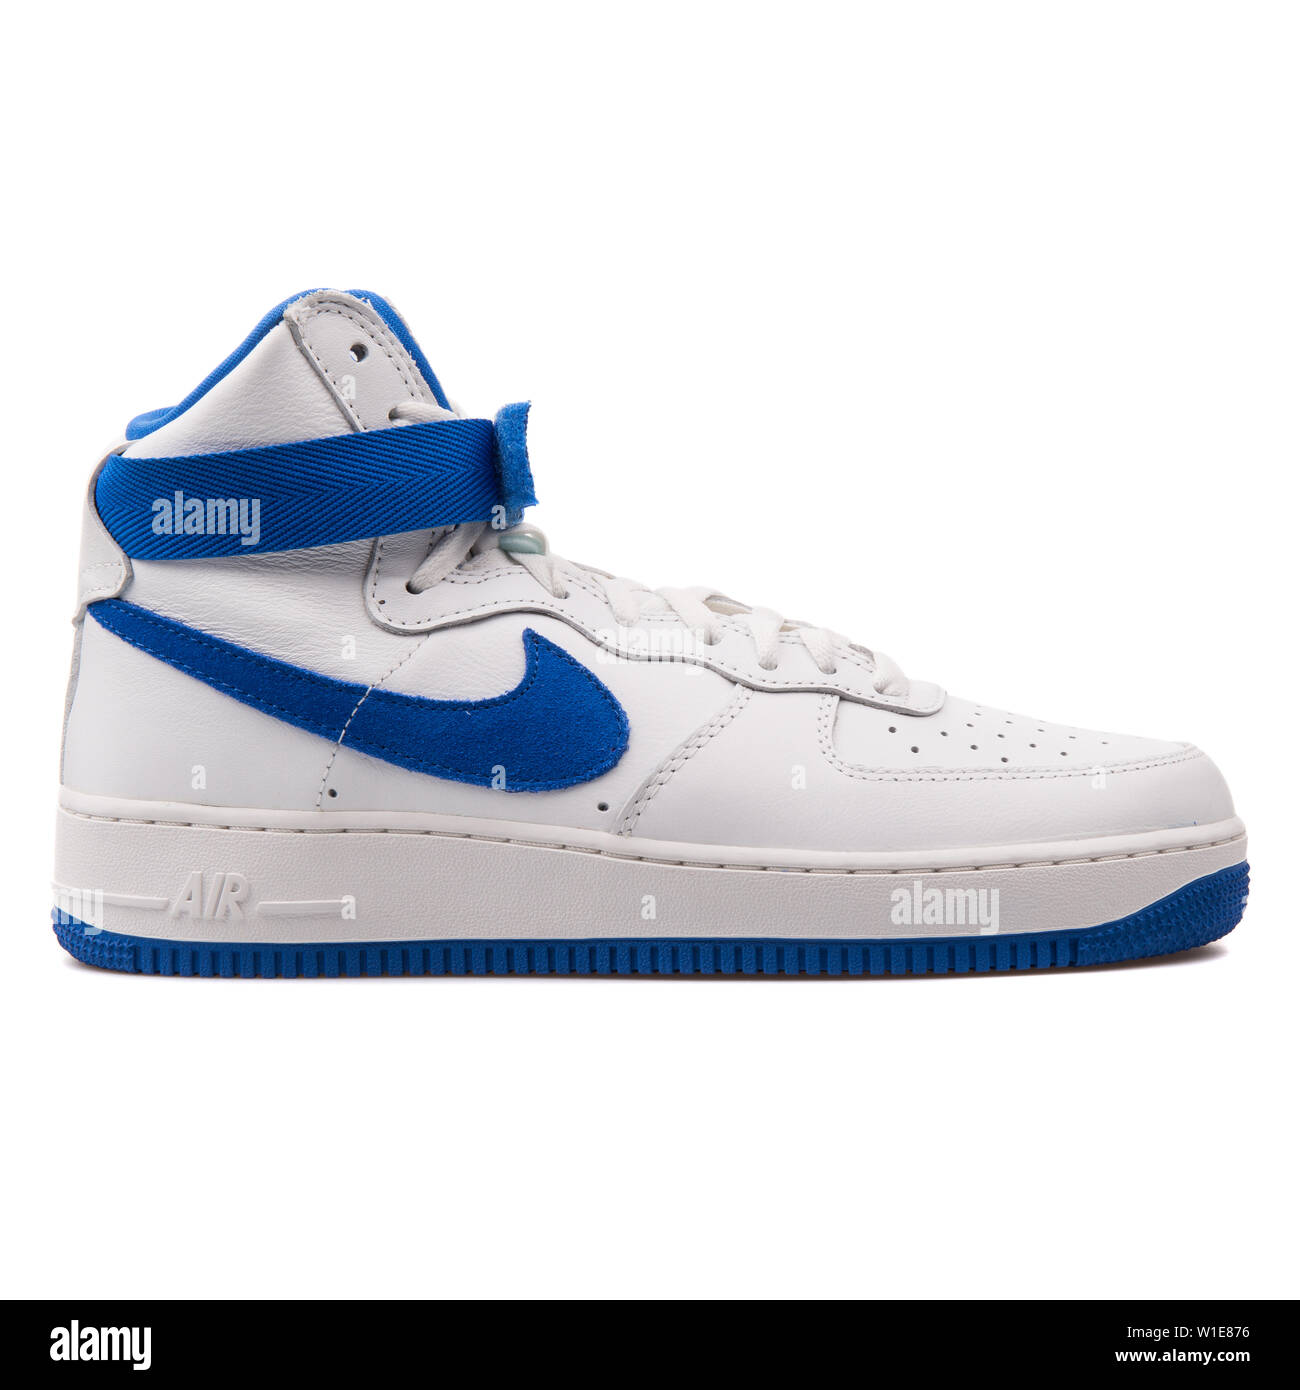 VIENNA, AUSTRIA - AUGUST 25, 2017: Nike Air Force 1 High Retro QS white and  blue sneaker on white background Stock Photo - Alamy